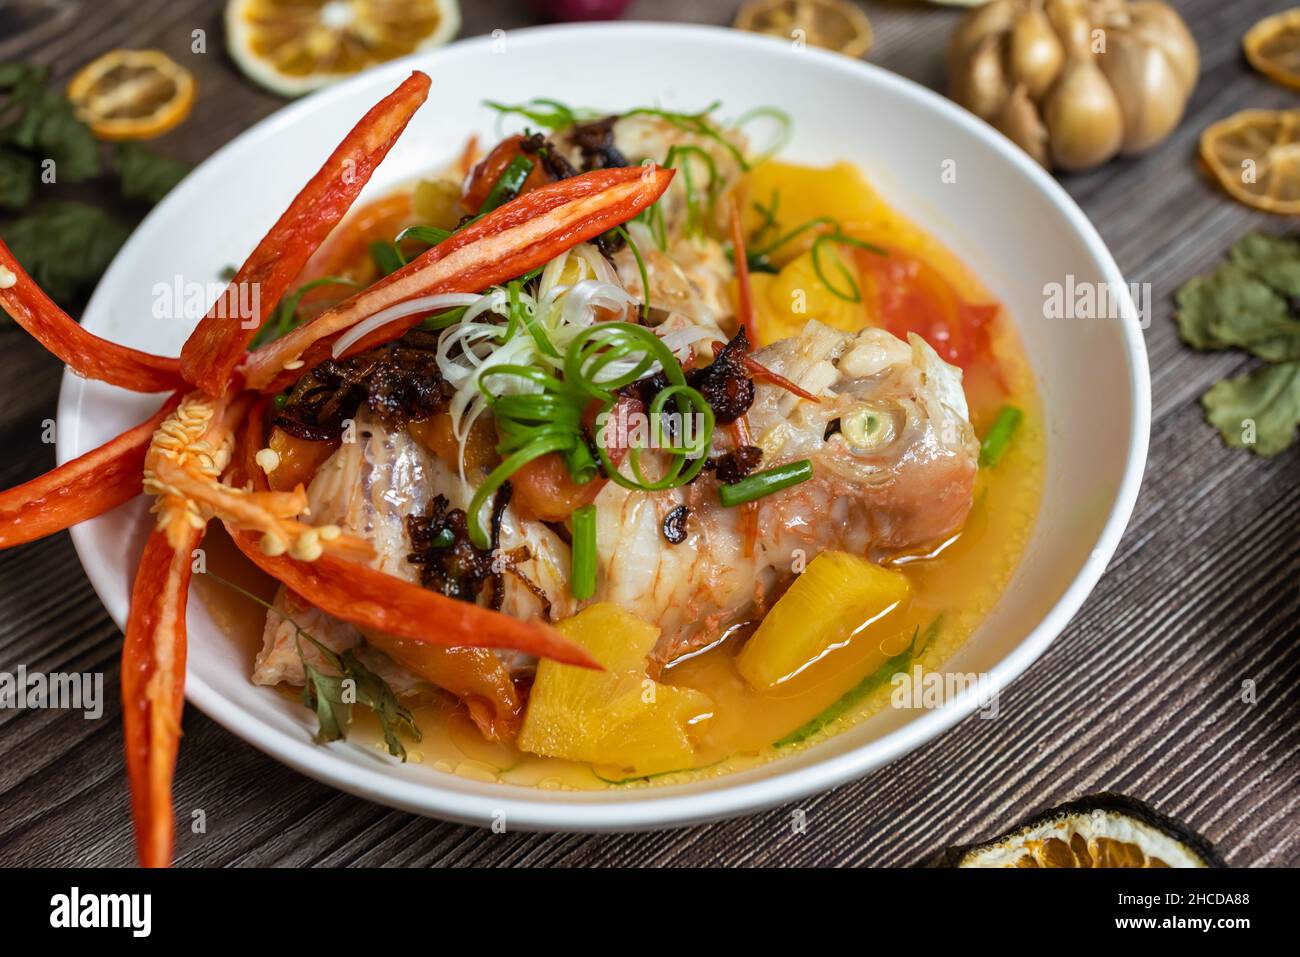 Steamed red snapper fish with ingredients including fish, pineapple, tomato, chili and spices Stock Photo